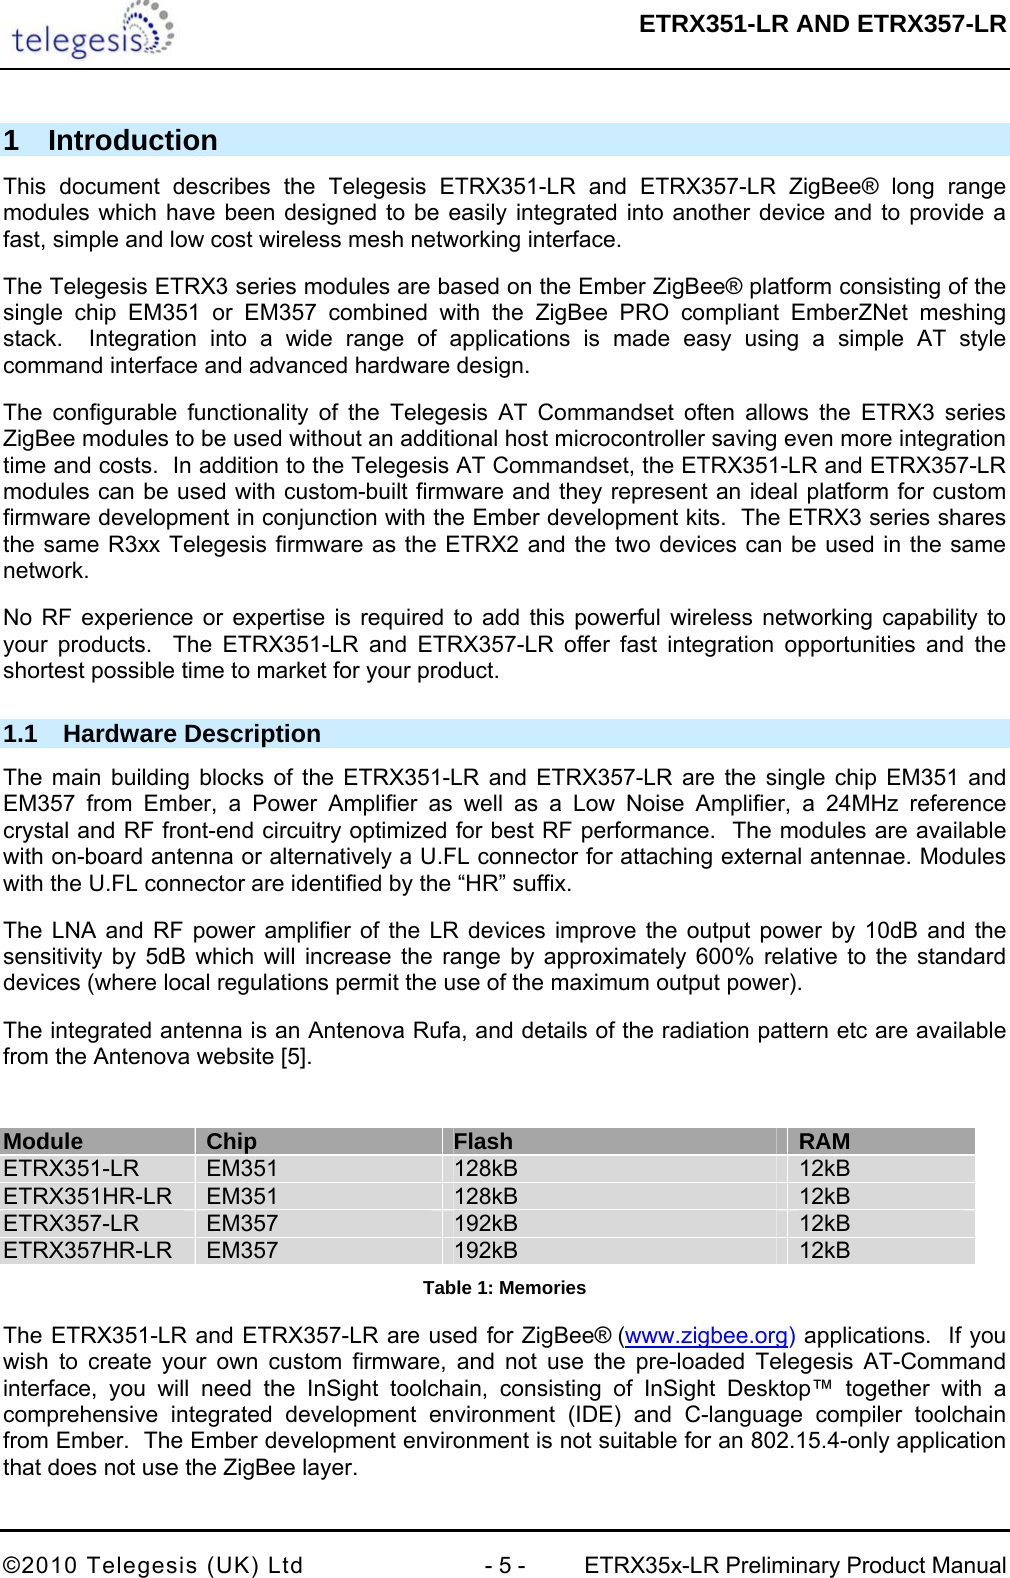  ETRX351-LR AND ETRX357-LR  ©2010 Telegesis (UK) Ltd  - 5 -  ETRX35x-LR Preliminary Product Manual 1 Introduction This document describes the Telegesis ETRX351-LR and ETRX357-LR ZigBee® long range modules which have been designed to be easily integrated into another device and to provide a fast, simple and low cost wireless mesh networking interface. The Telegesis ETRX3 series modules are based on the Ember ZigBee® platform consisting of the single chip EM351 or EM357 combined with the ZigBee PRO compliant EmberZNet meshing stack.  Integration into a wide range of applications is made easy using a simple AT style command interface and advanced hardware design. The configurable functionality of the Telegesis AT Commandset often allows the ETRX3 series ZigBee modules to be used without an additional host microcontroller saving even more integration time and costs.  In addition to the Telegesis AT Commandset, the ETRX351-LR and ETRX357-LR modules can be used with custom-built firmware and they represent an ideal platform for custom firmware development in conjunction with the Ember development kits.  The ETRX3 series shares the same R3xx Telegesis firmware as the ETRX2 and the two devices can be used in the same network. No RF experience or expertise is required to add this powerful wireless networking capability to your products.  The ETRX351-LR and ETRX357-LR offer fast integration opportunities and the shortest possible time to market for your product. 1.1 Hardware Description The main building blocks of the ETRX351-LR and ETRX357-LR are the single chip EM351 and EM357 from Ember, a Power Amplifier as well as a Low Noise Amplifier, a 24MHz reference crystal and RF front-end circuitry optimized for best RF performance.  The modules are available with on-board antenna or alternatively a U.FL connector for attaching external antennae. Modules with the U.FL connector are identified by the “HR” suffix. The LNA and RF power amplifier of the LR devices improve the output power by 10dB and the sensitivity by 5dB which will increase the range by approximately 600% relative to the standard devices (where local regulations permit the use of the maximum output power). The integrated antenna is an Antenova Rufa, and details of the radiation pattern etc are available from the Antenova website  [5].  Module  Chip  Flash  RAM ETRX351-LR  EM351  128kB  12kB ETRX351HR-LR  EM351  128kB  12kB ETRX357-LR  EM357  192kB  12kB ETRX357HR-LR  EM357  192kB  12kB Table 1: Memories The ETRX351-LR and ETRX357-LR are used for ZigBee® (www.zigbee.org) applications.  If you wish to create your own custom firmware, and not use the pre-loaded Telegesis AT-Command interface, you will need the InSight toolchain, consisting of InSight Desktop™ together with a comprehensive integrated development environment (IDE) and C-language compiler toolchain from Ember.  The Ember development environment is not suitable for an 802.15.4-only application that does not use the ZigBee layer. 